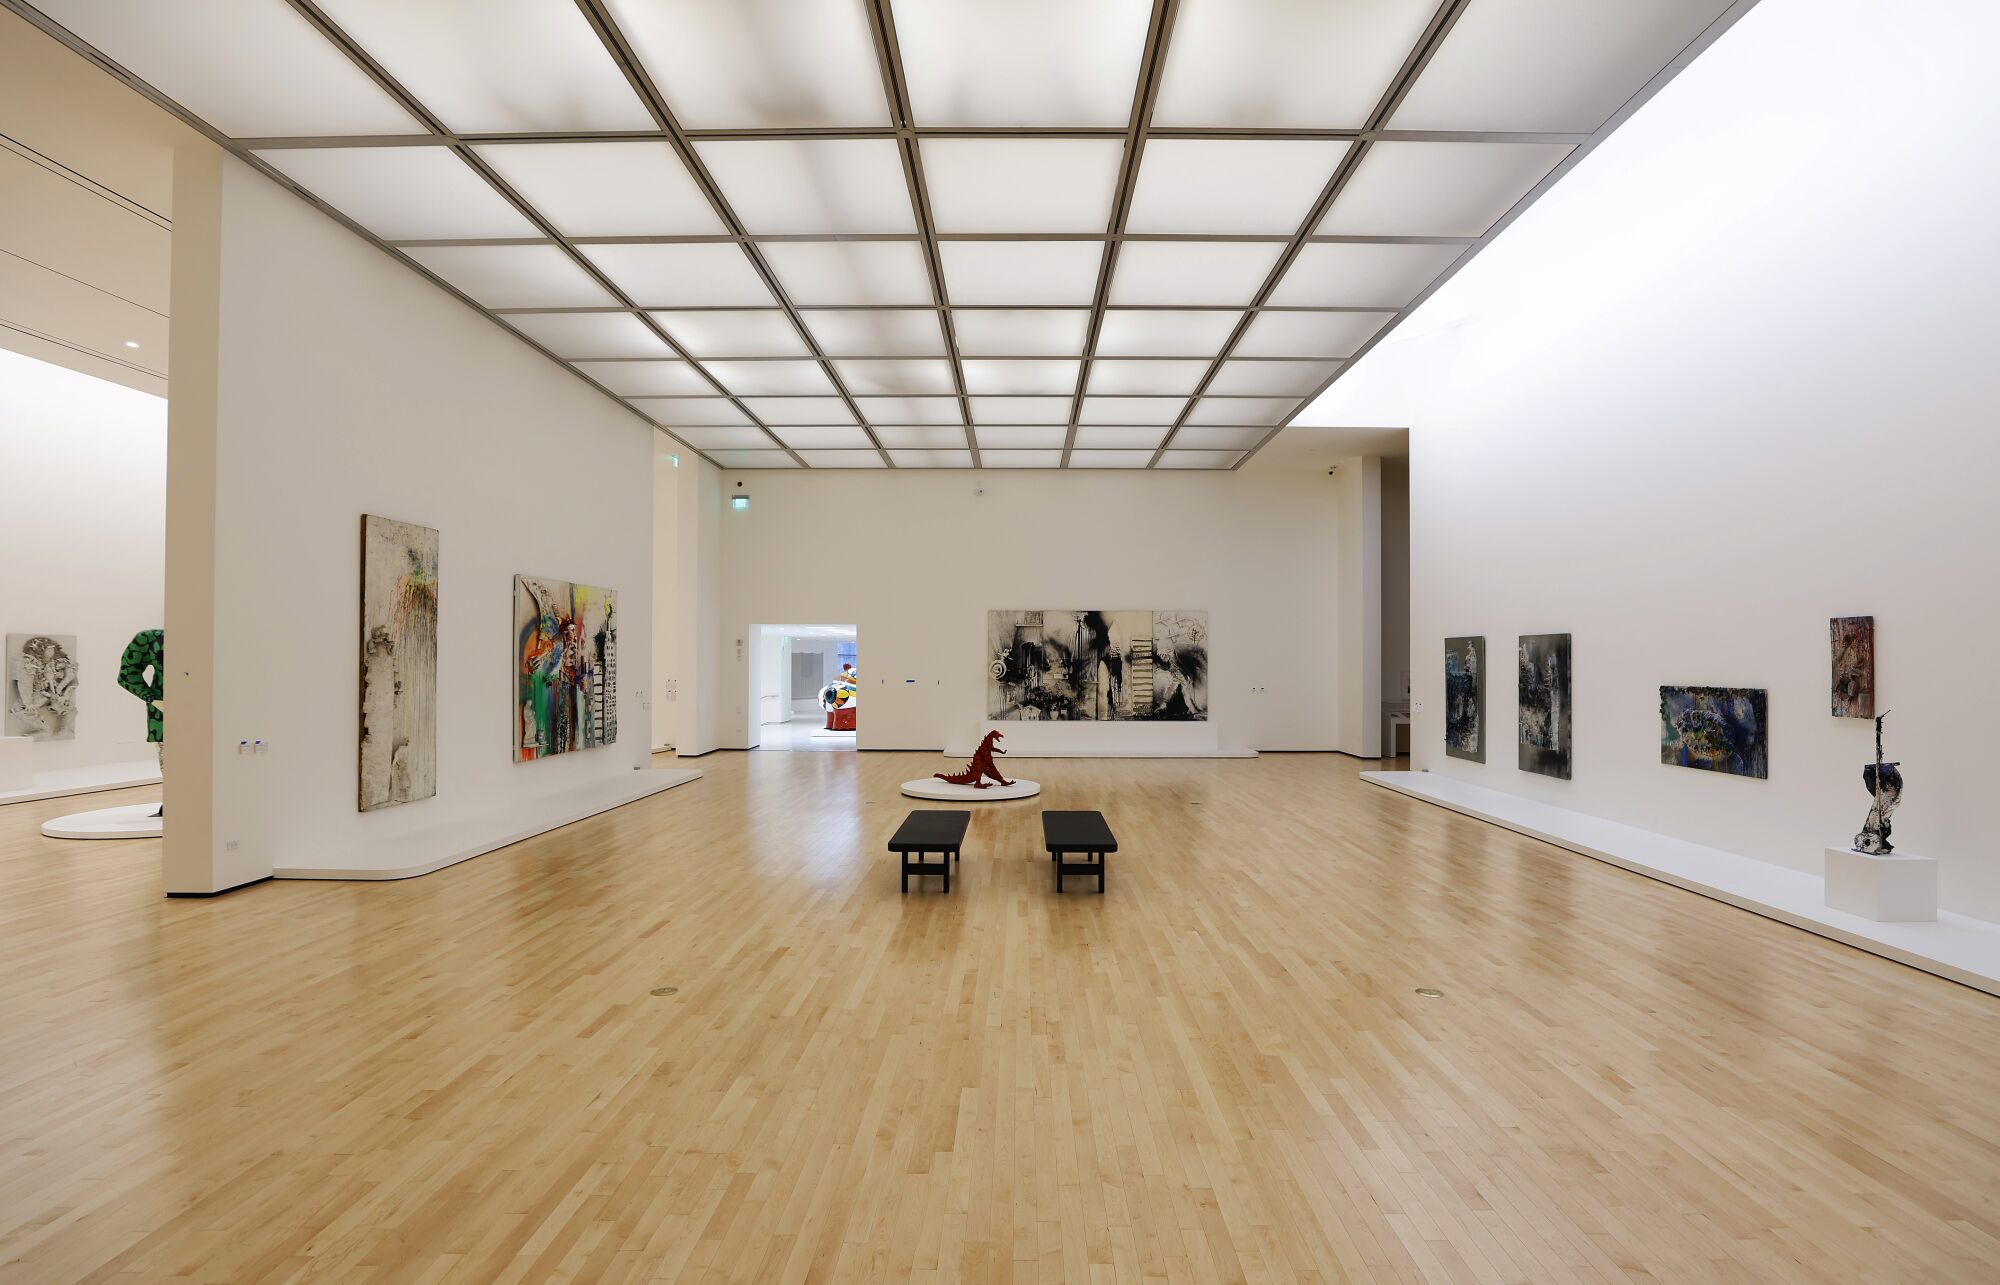 An art gallery with two benches, a dinosaur sculpture on the floor and paintings on the walls